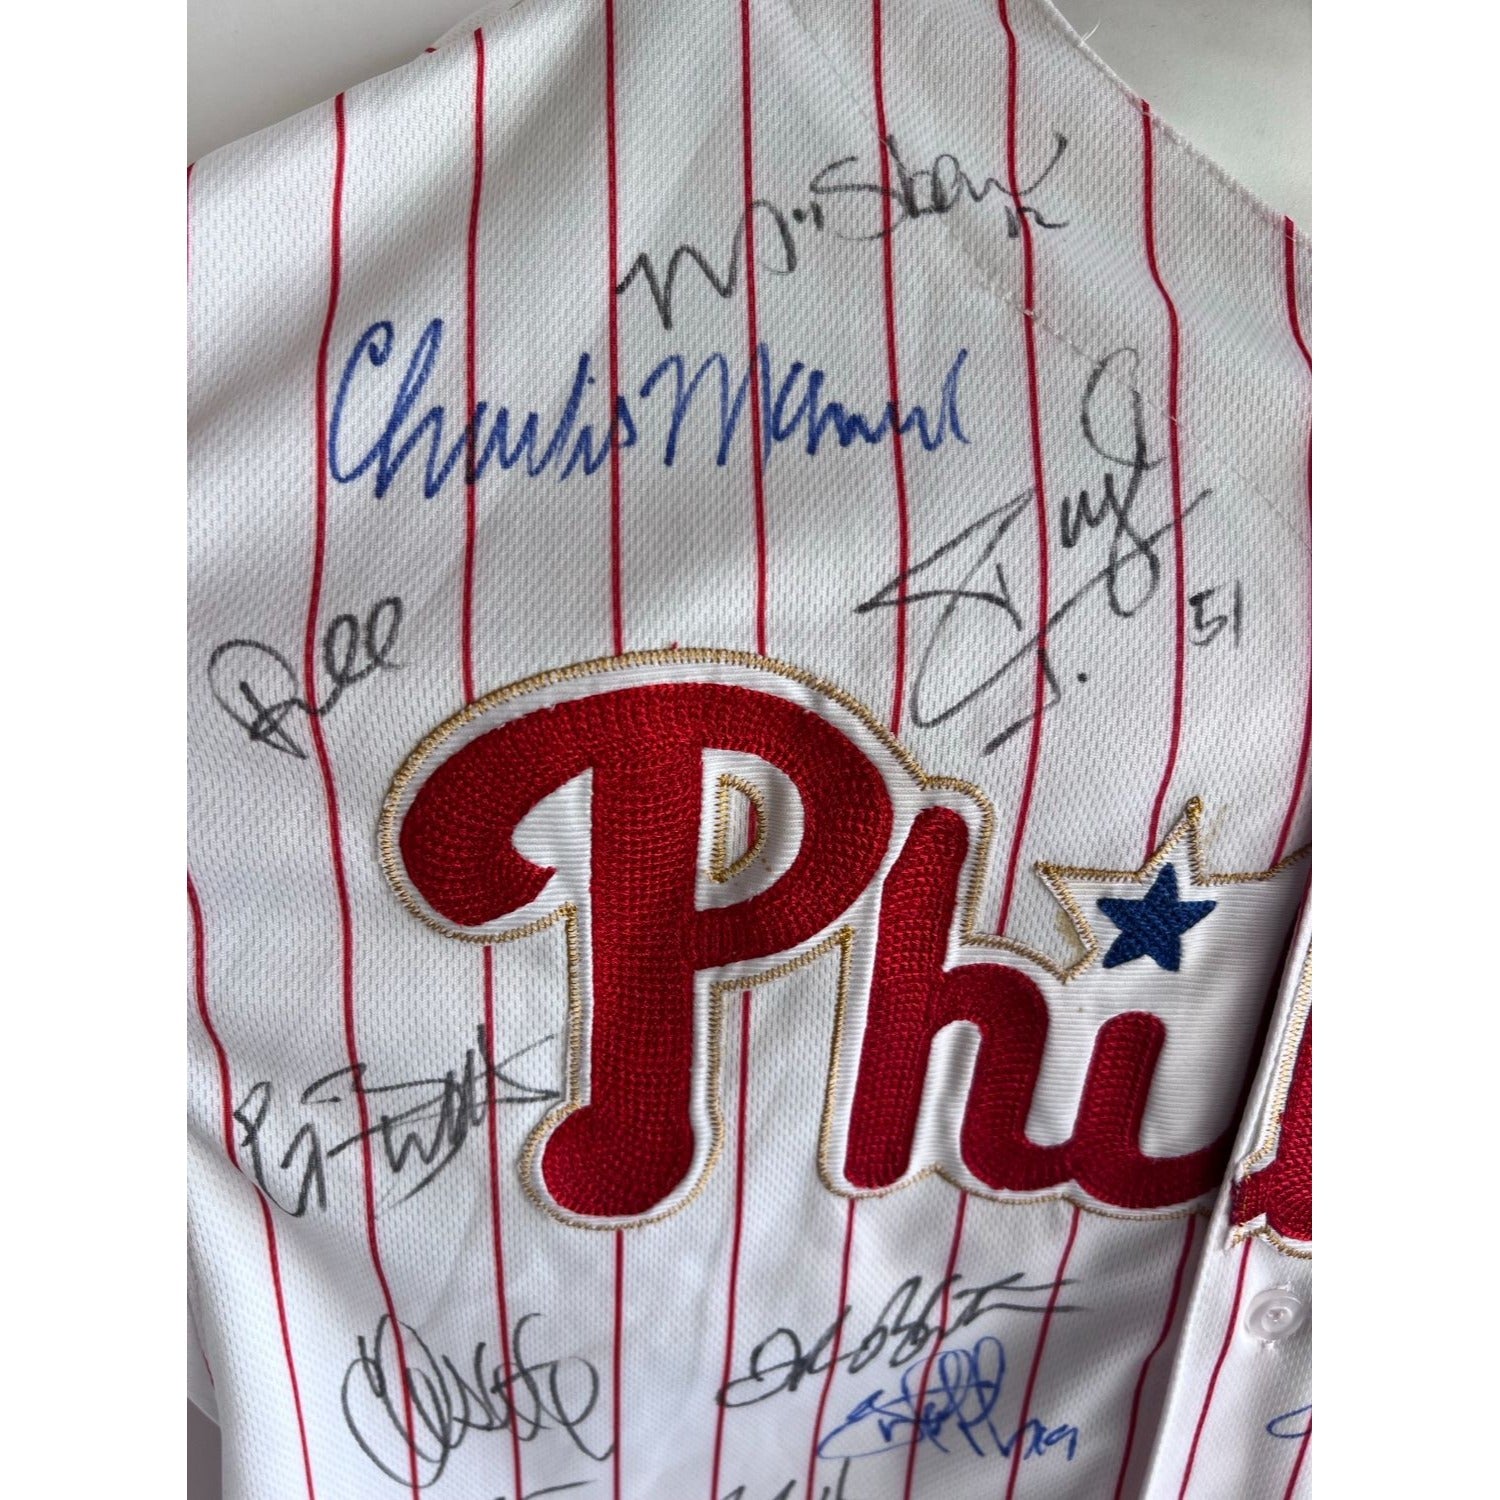 2008 Philadelphia Phillies World Series Jersey Ibanez #29 team signed with proof